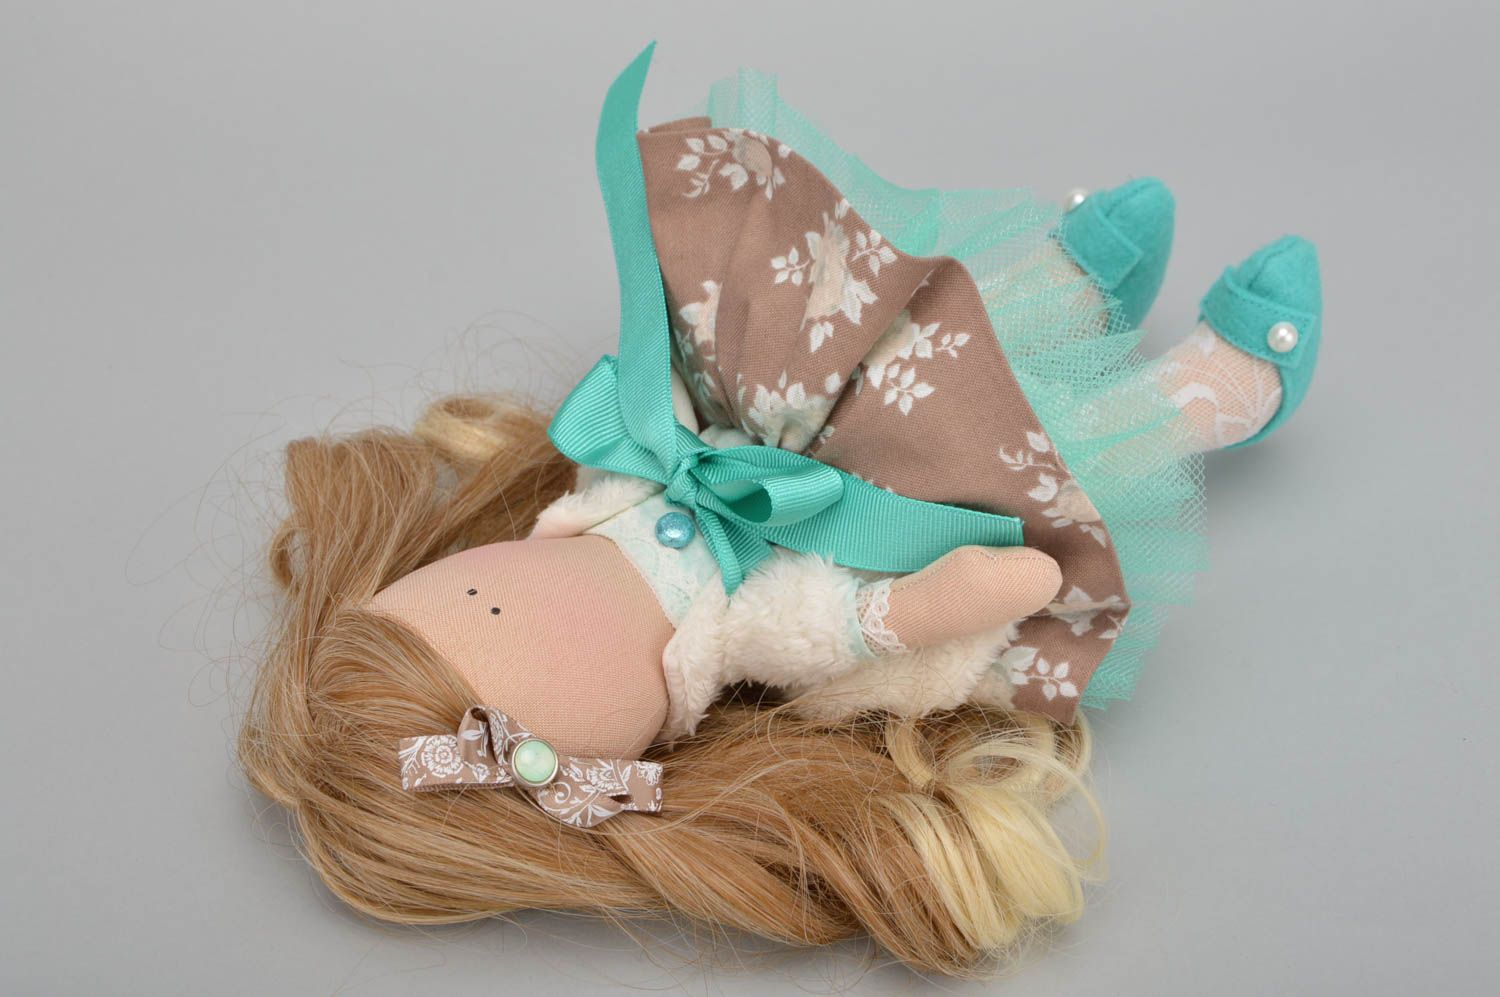 Handmade designer jersey fabric soft doll in beige and turquoise dress photo 4